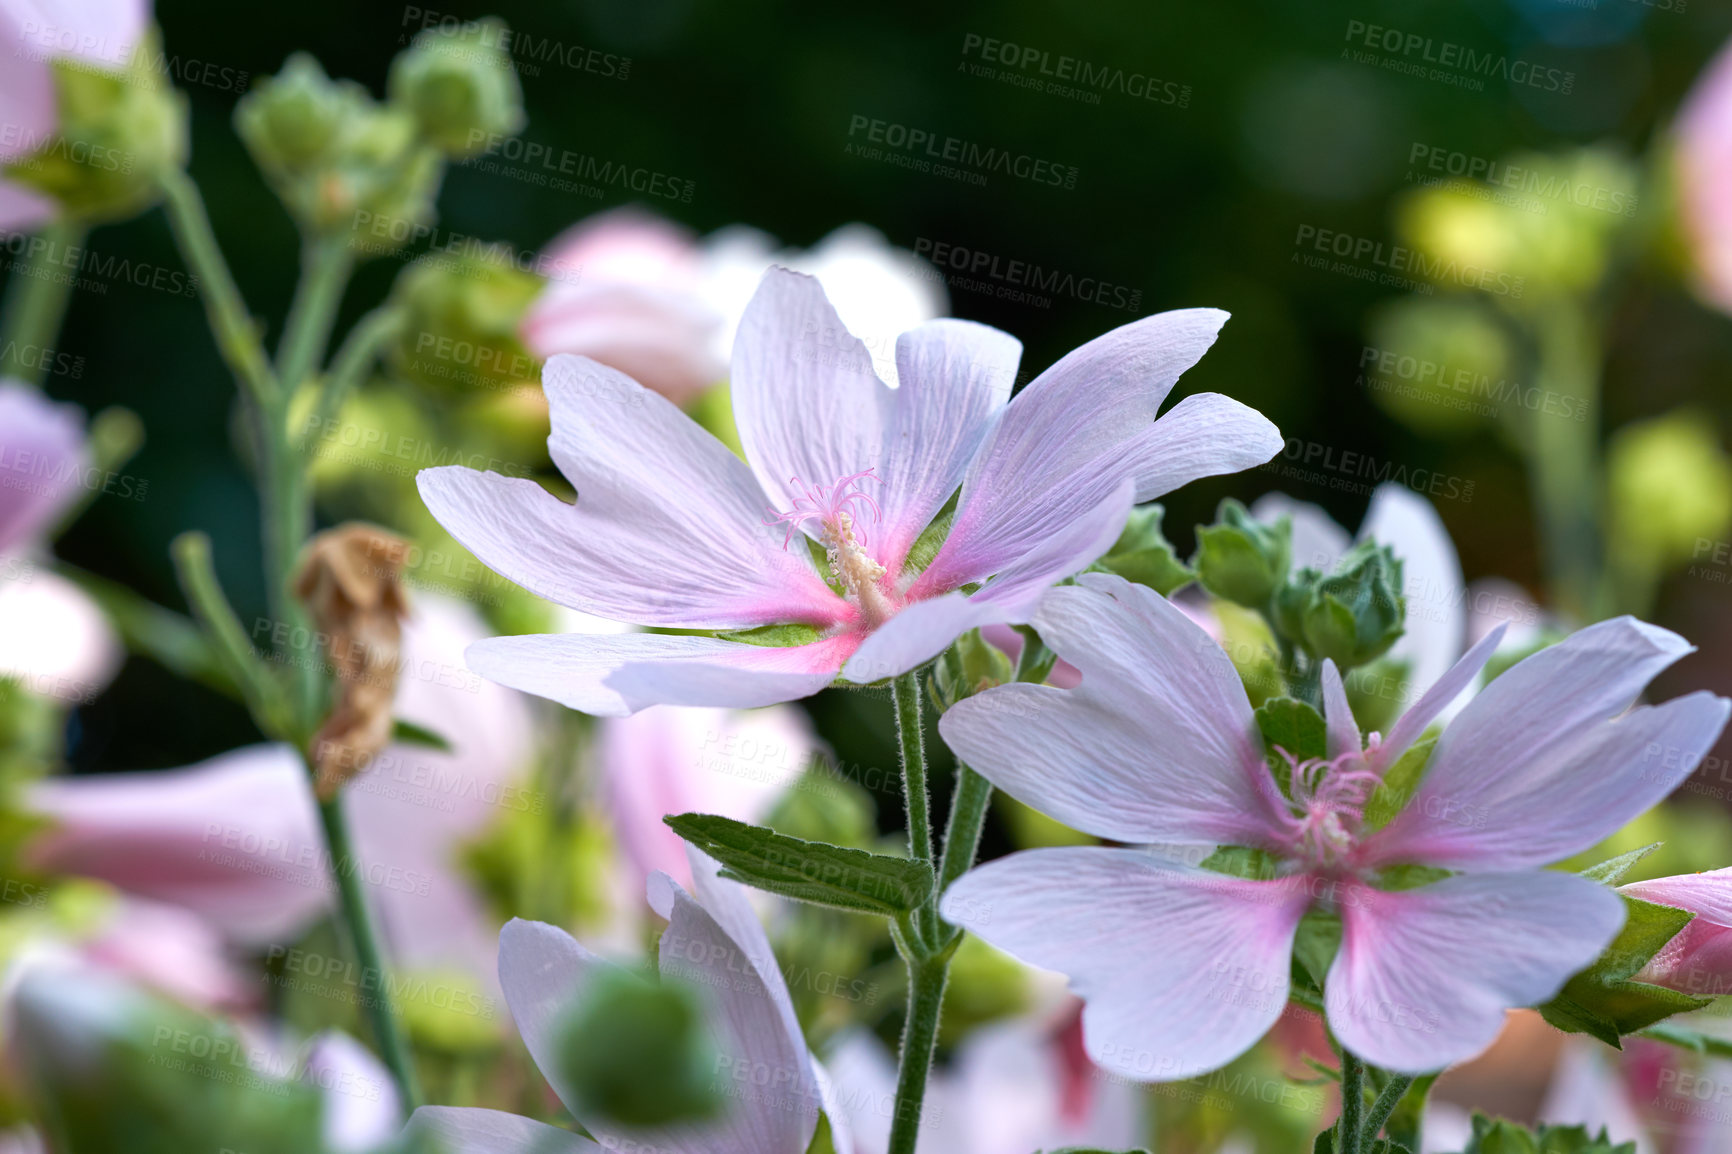 Buy stock photo Malva moschata musk mallow flowers growing in a garden or field outdoors. Closeup of beautiful flowering plants with pink petals blooming and blossoming in nature during a sunny day in spring